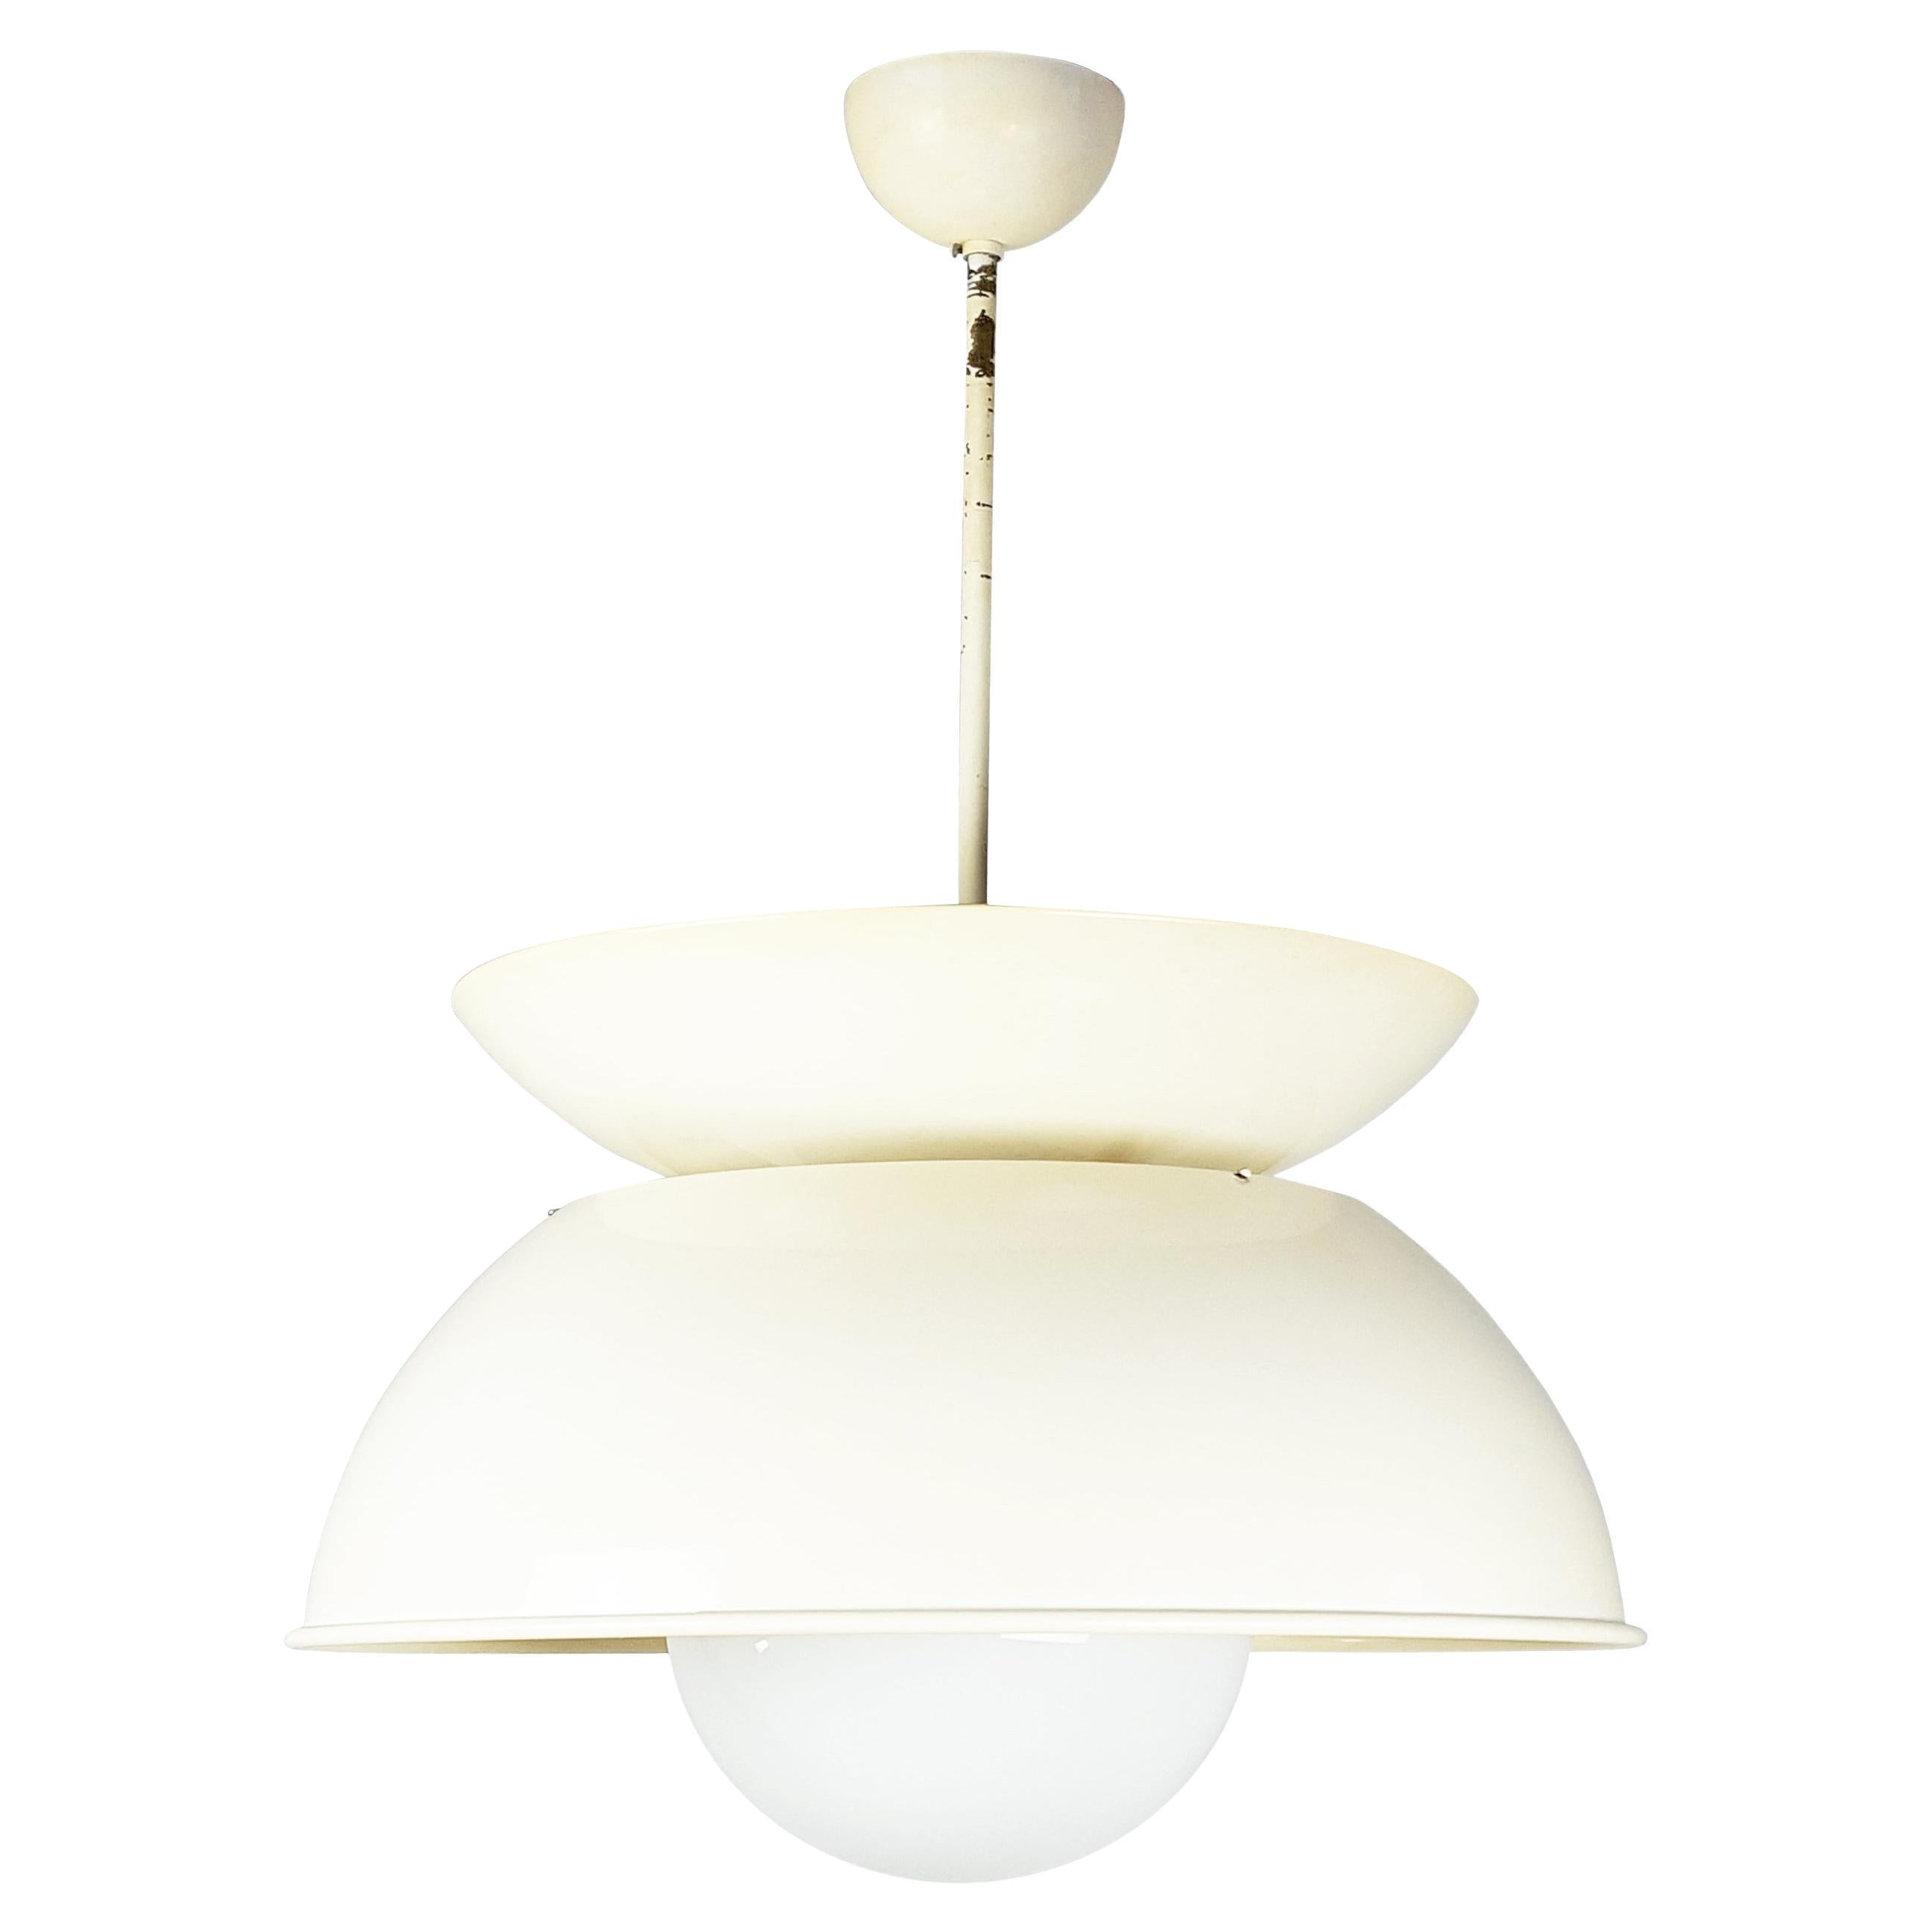 White/Ivory 1960s Cetra Pendant Lamp by V. Magistretti for Artemide For Sale